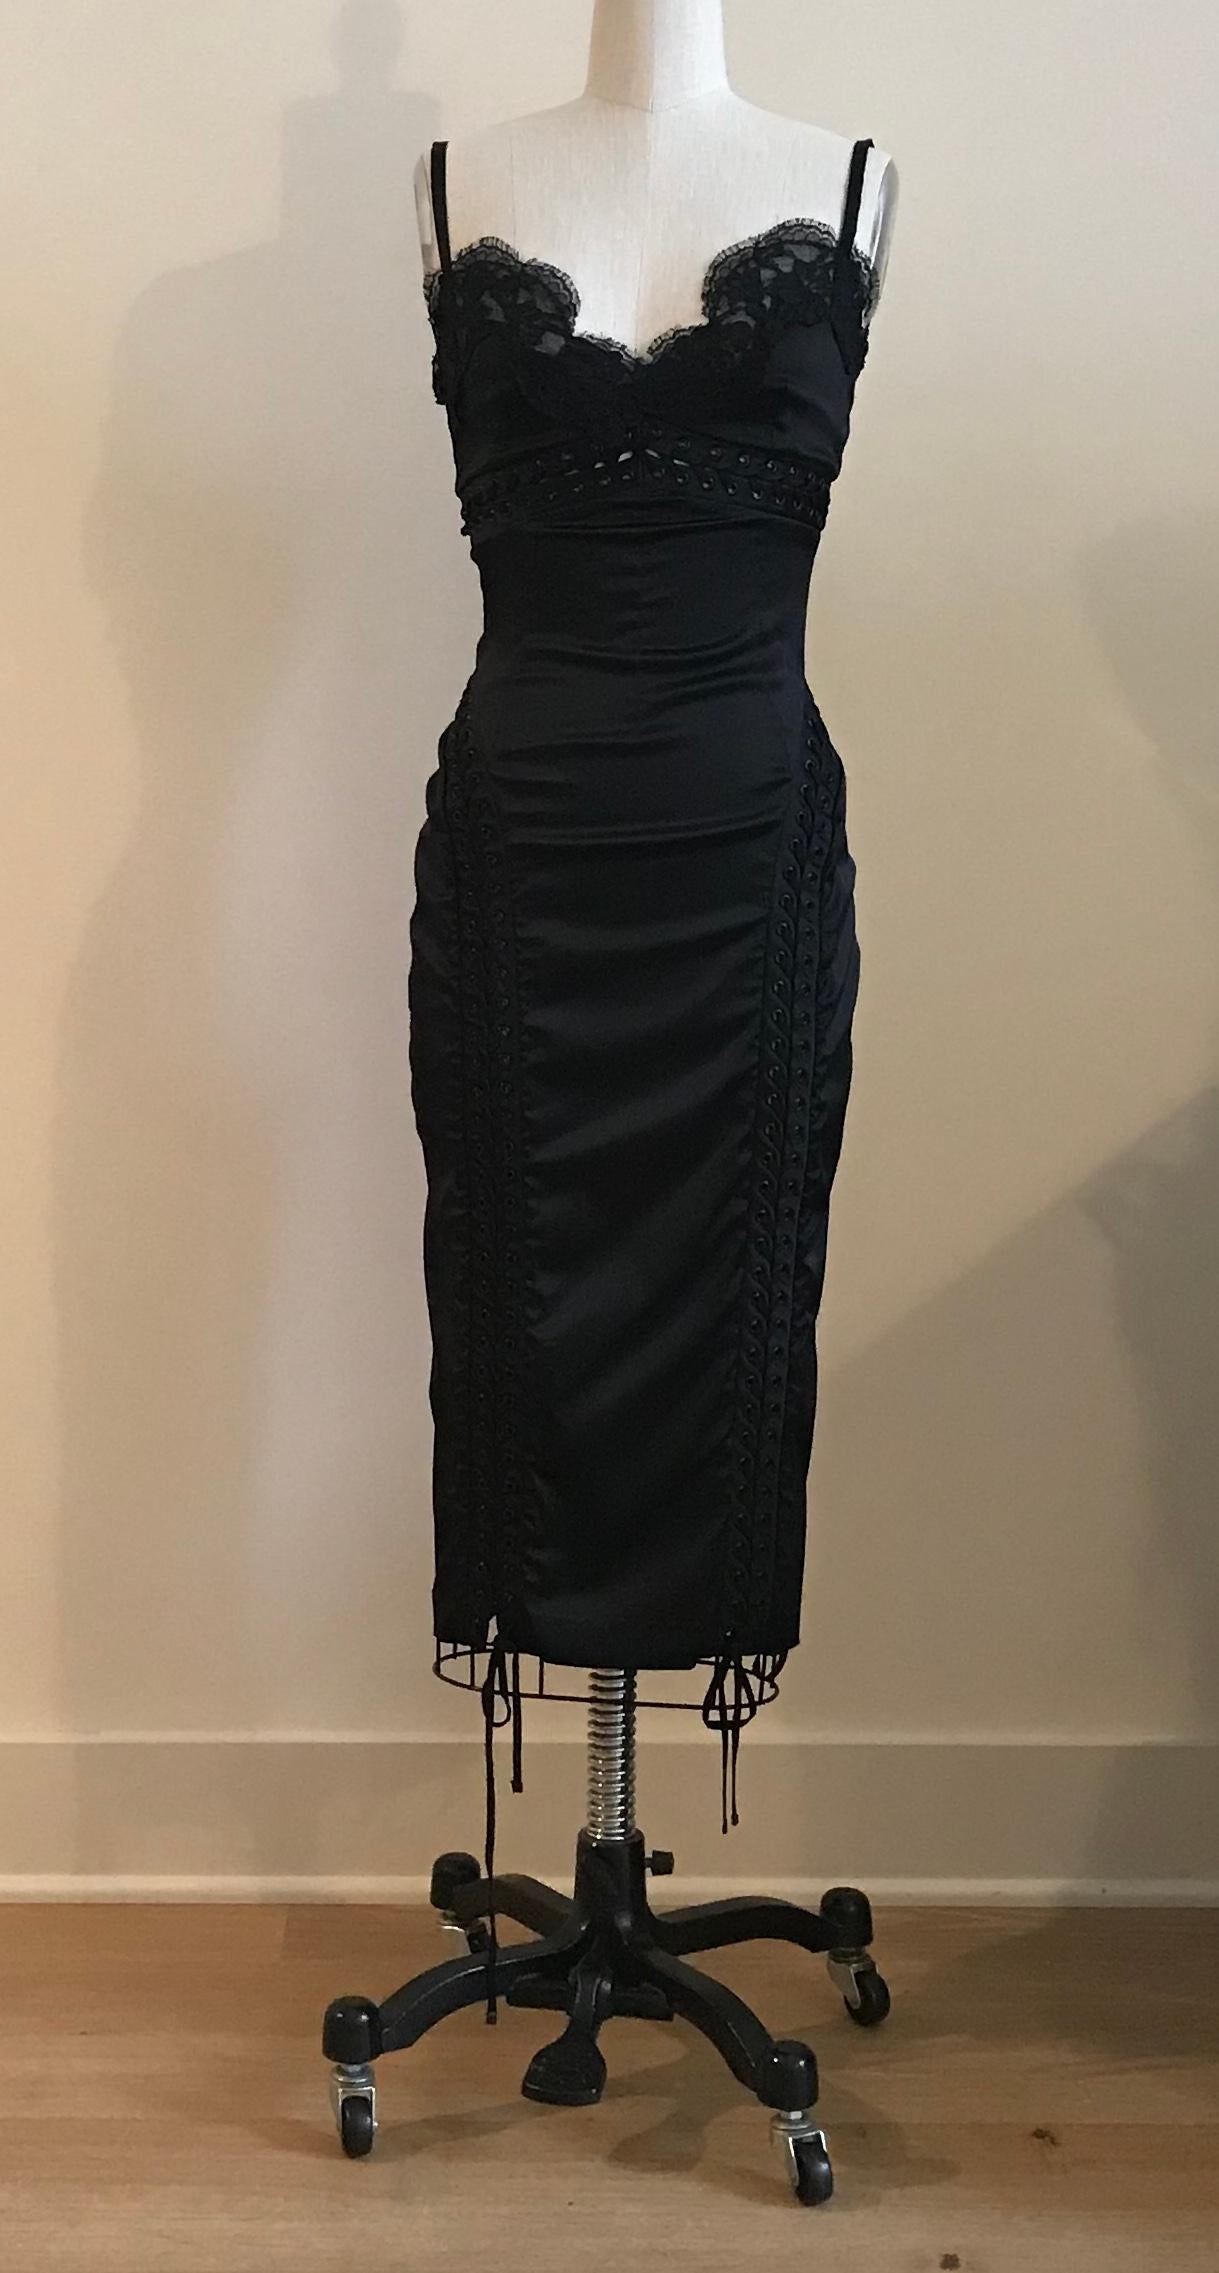 Dolce & Gabbana black satin midi dress with lace trim at chest and peekaboo corsetry inspired lacing at bodice and skirt. Back zip. Zips to just below buttocks and then fastens with hook and eyes so you can create an adjustable back slit if desired.